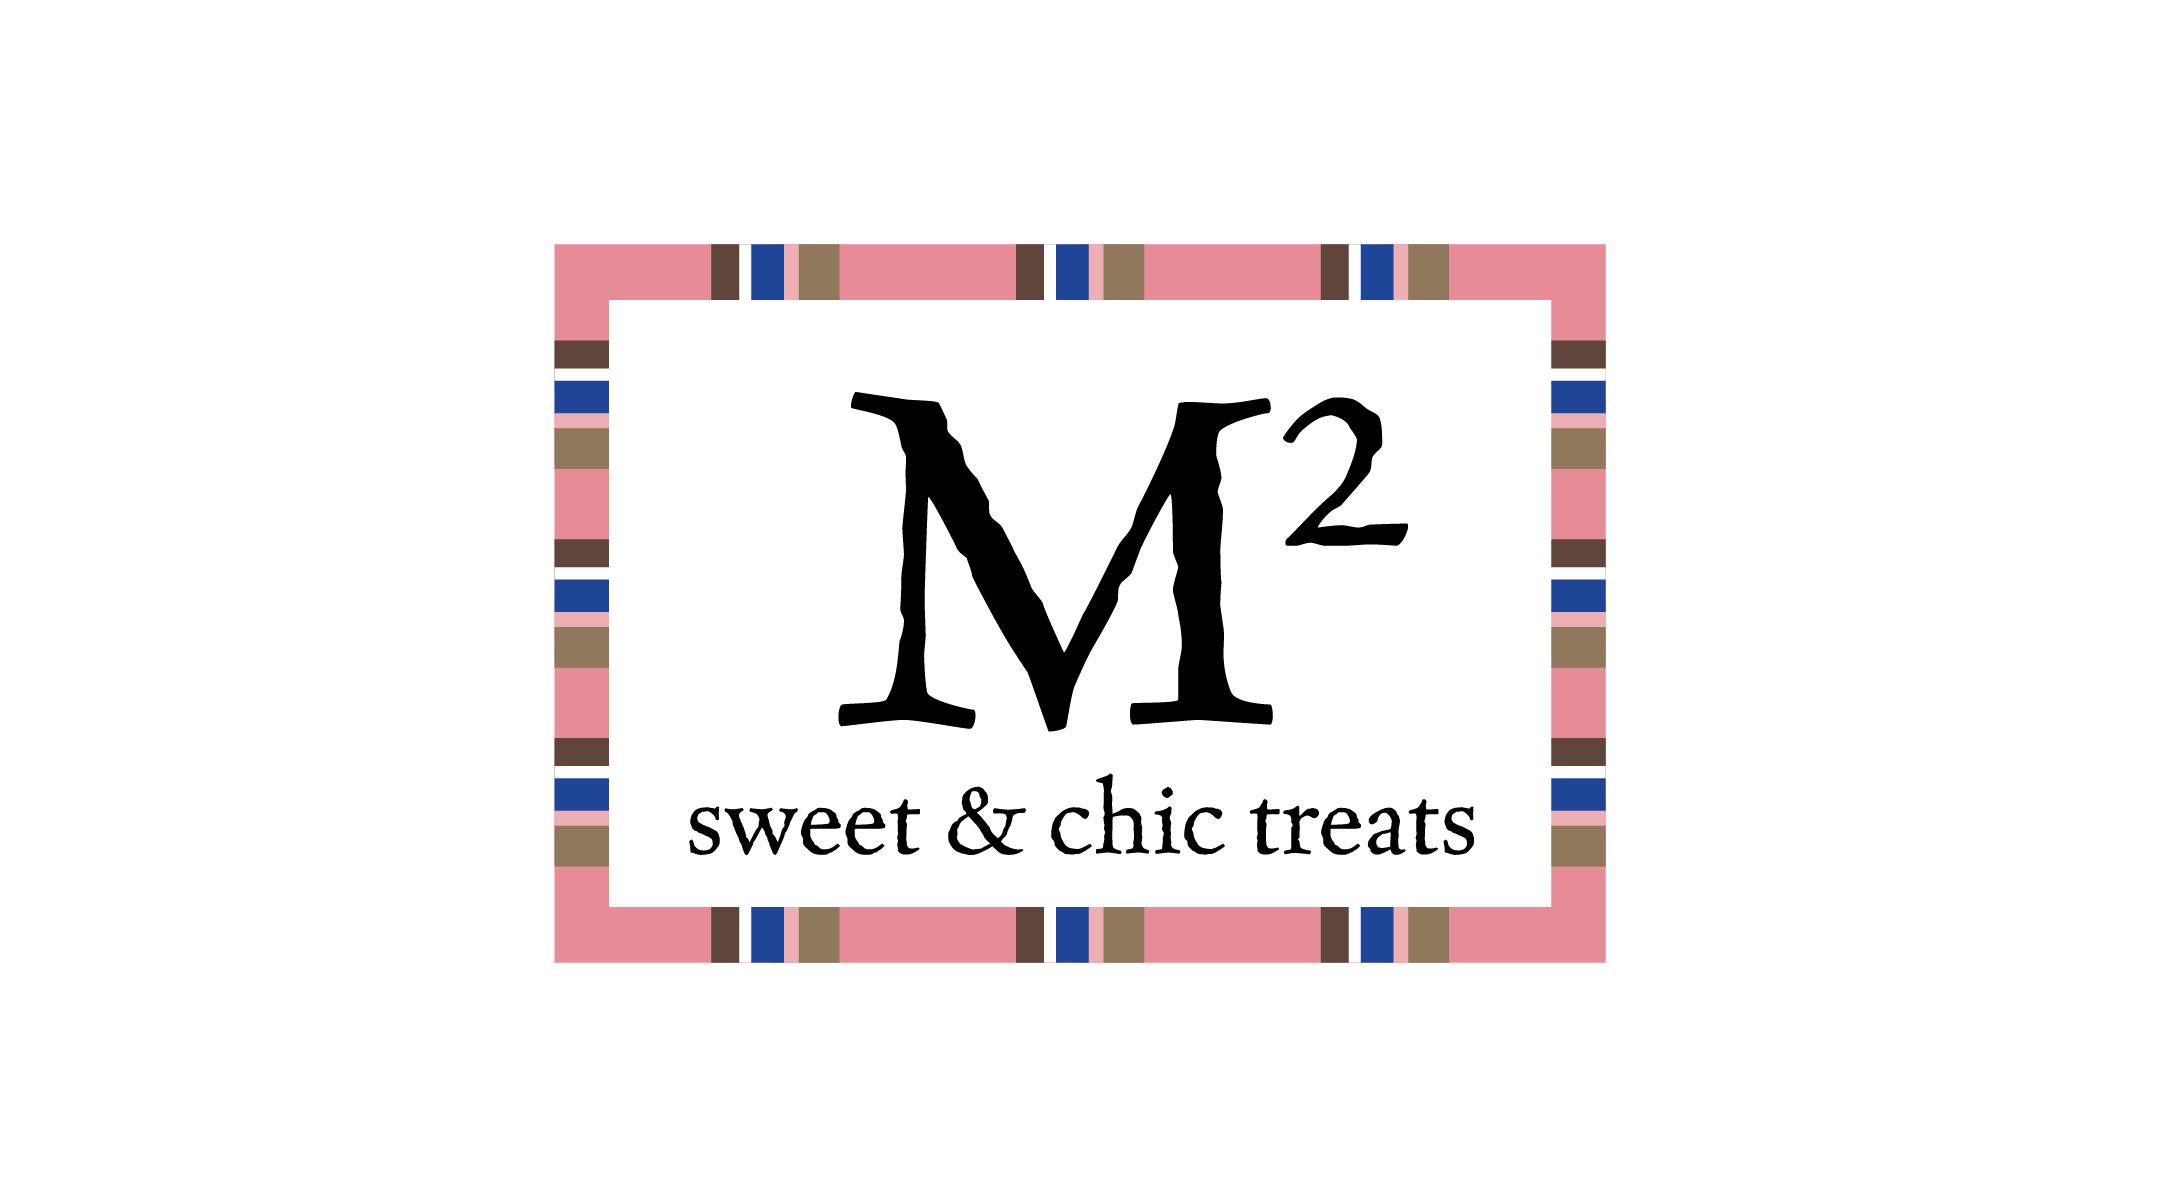 Logotype M Squared, a bakery line.